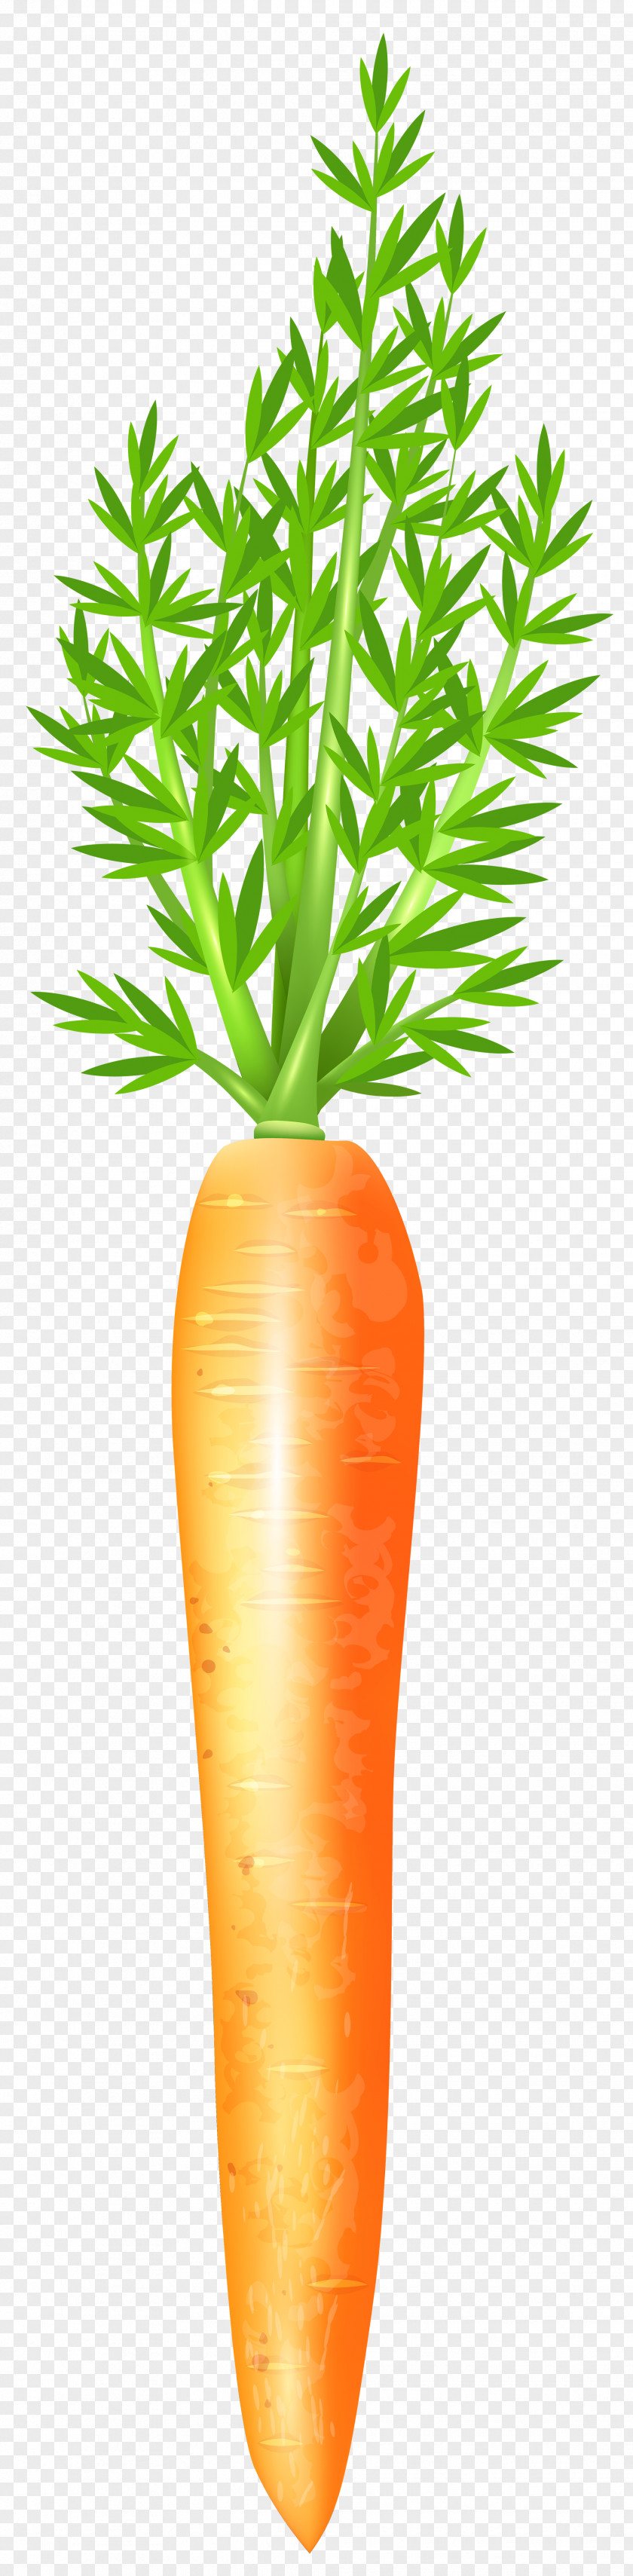 Carrot Free Clip Art Image PNG